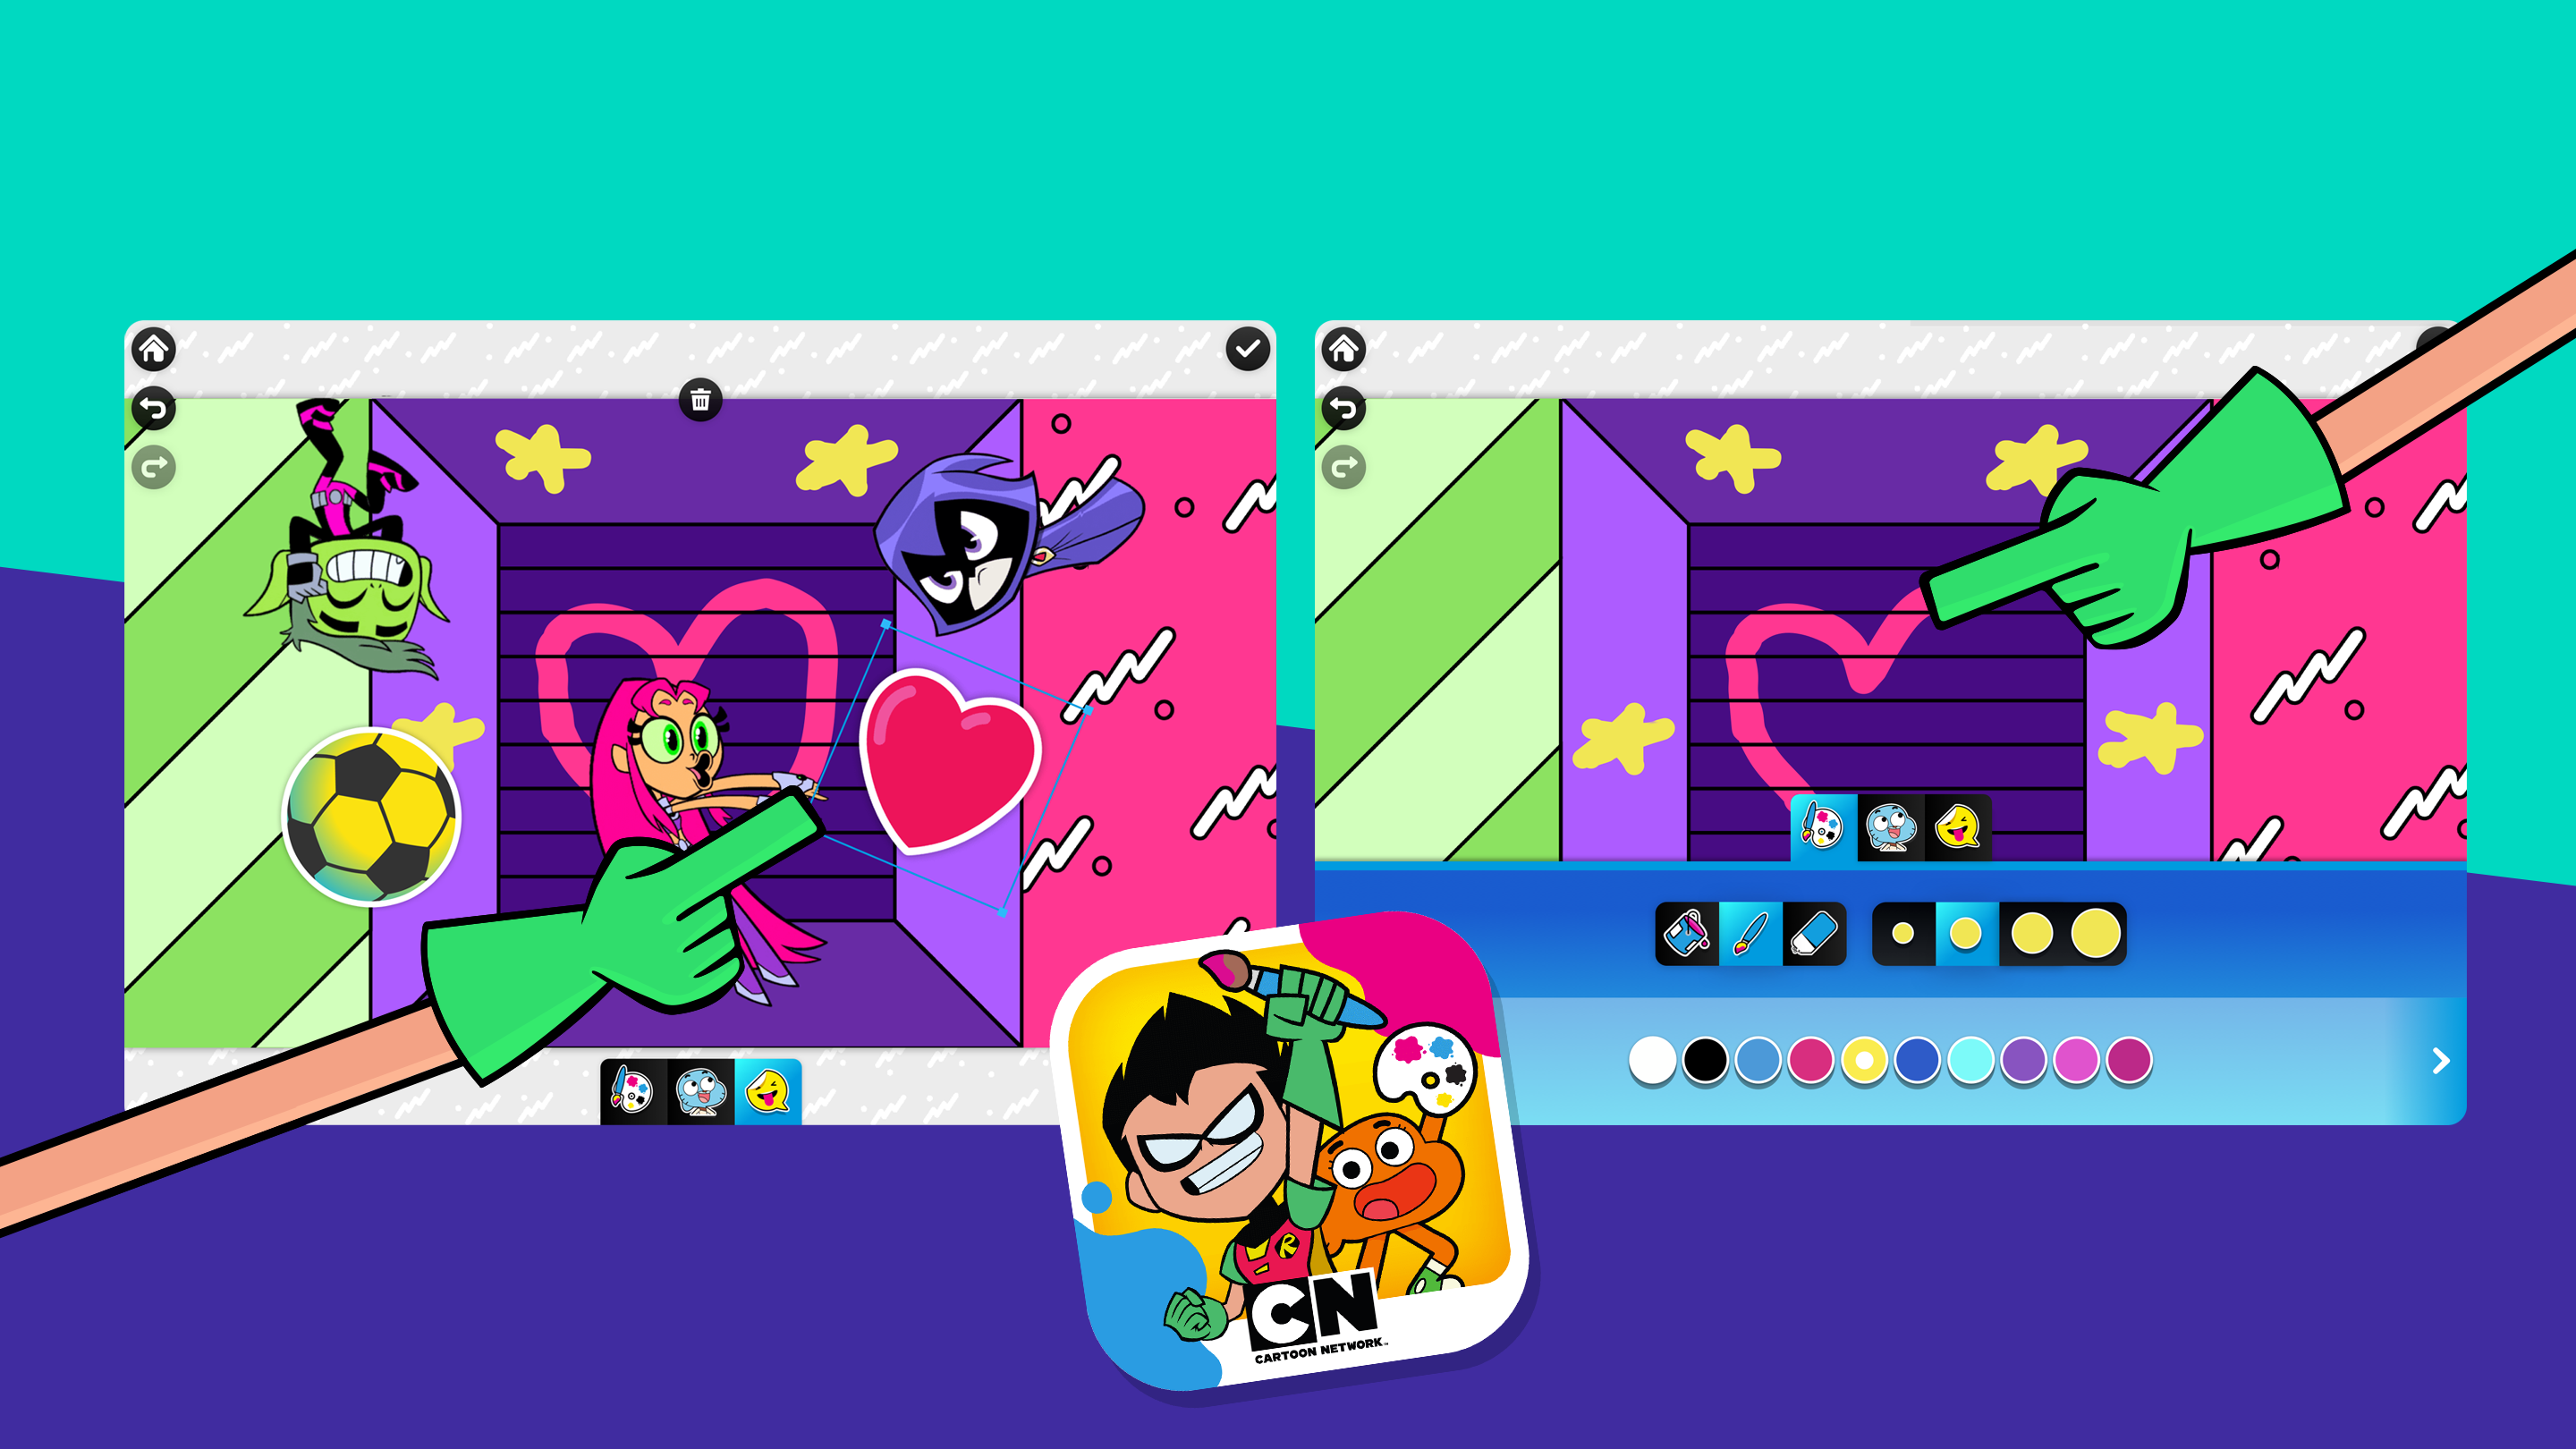 The cartoon network app being used